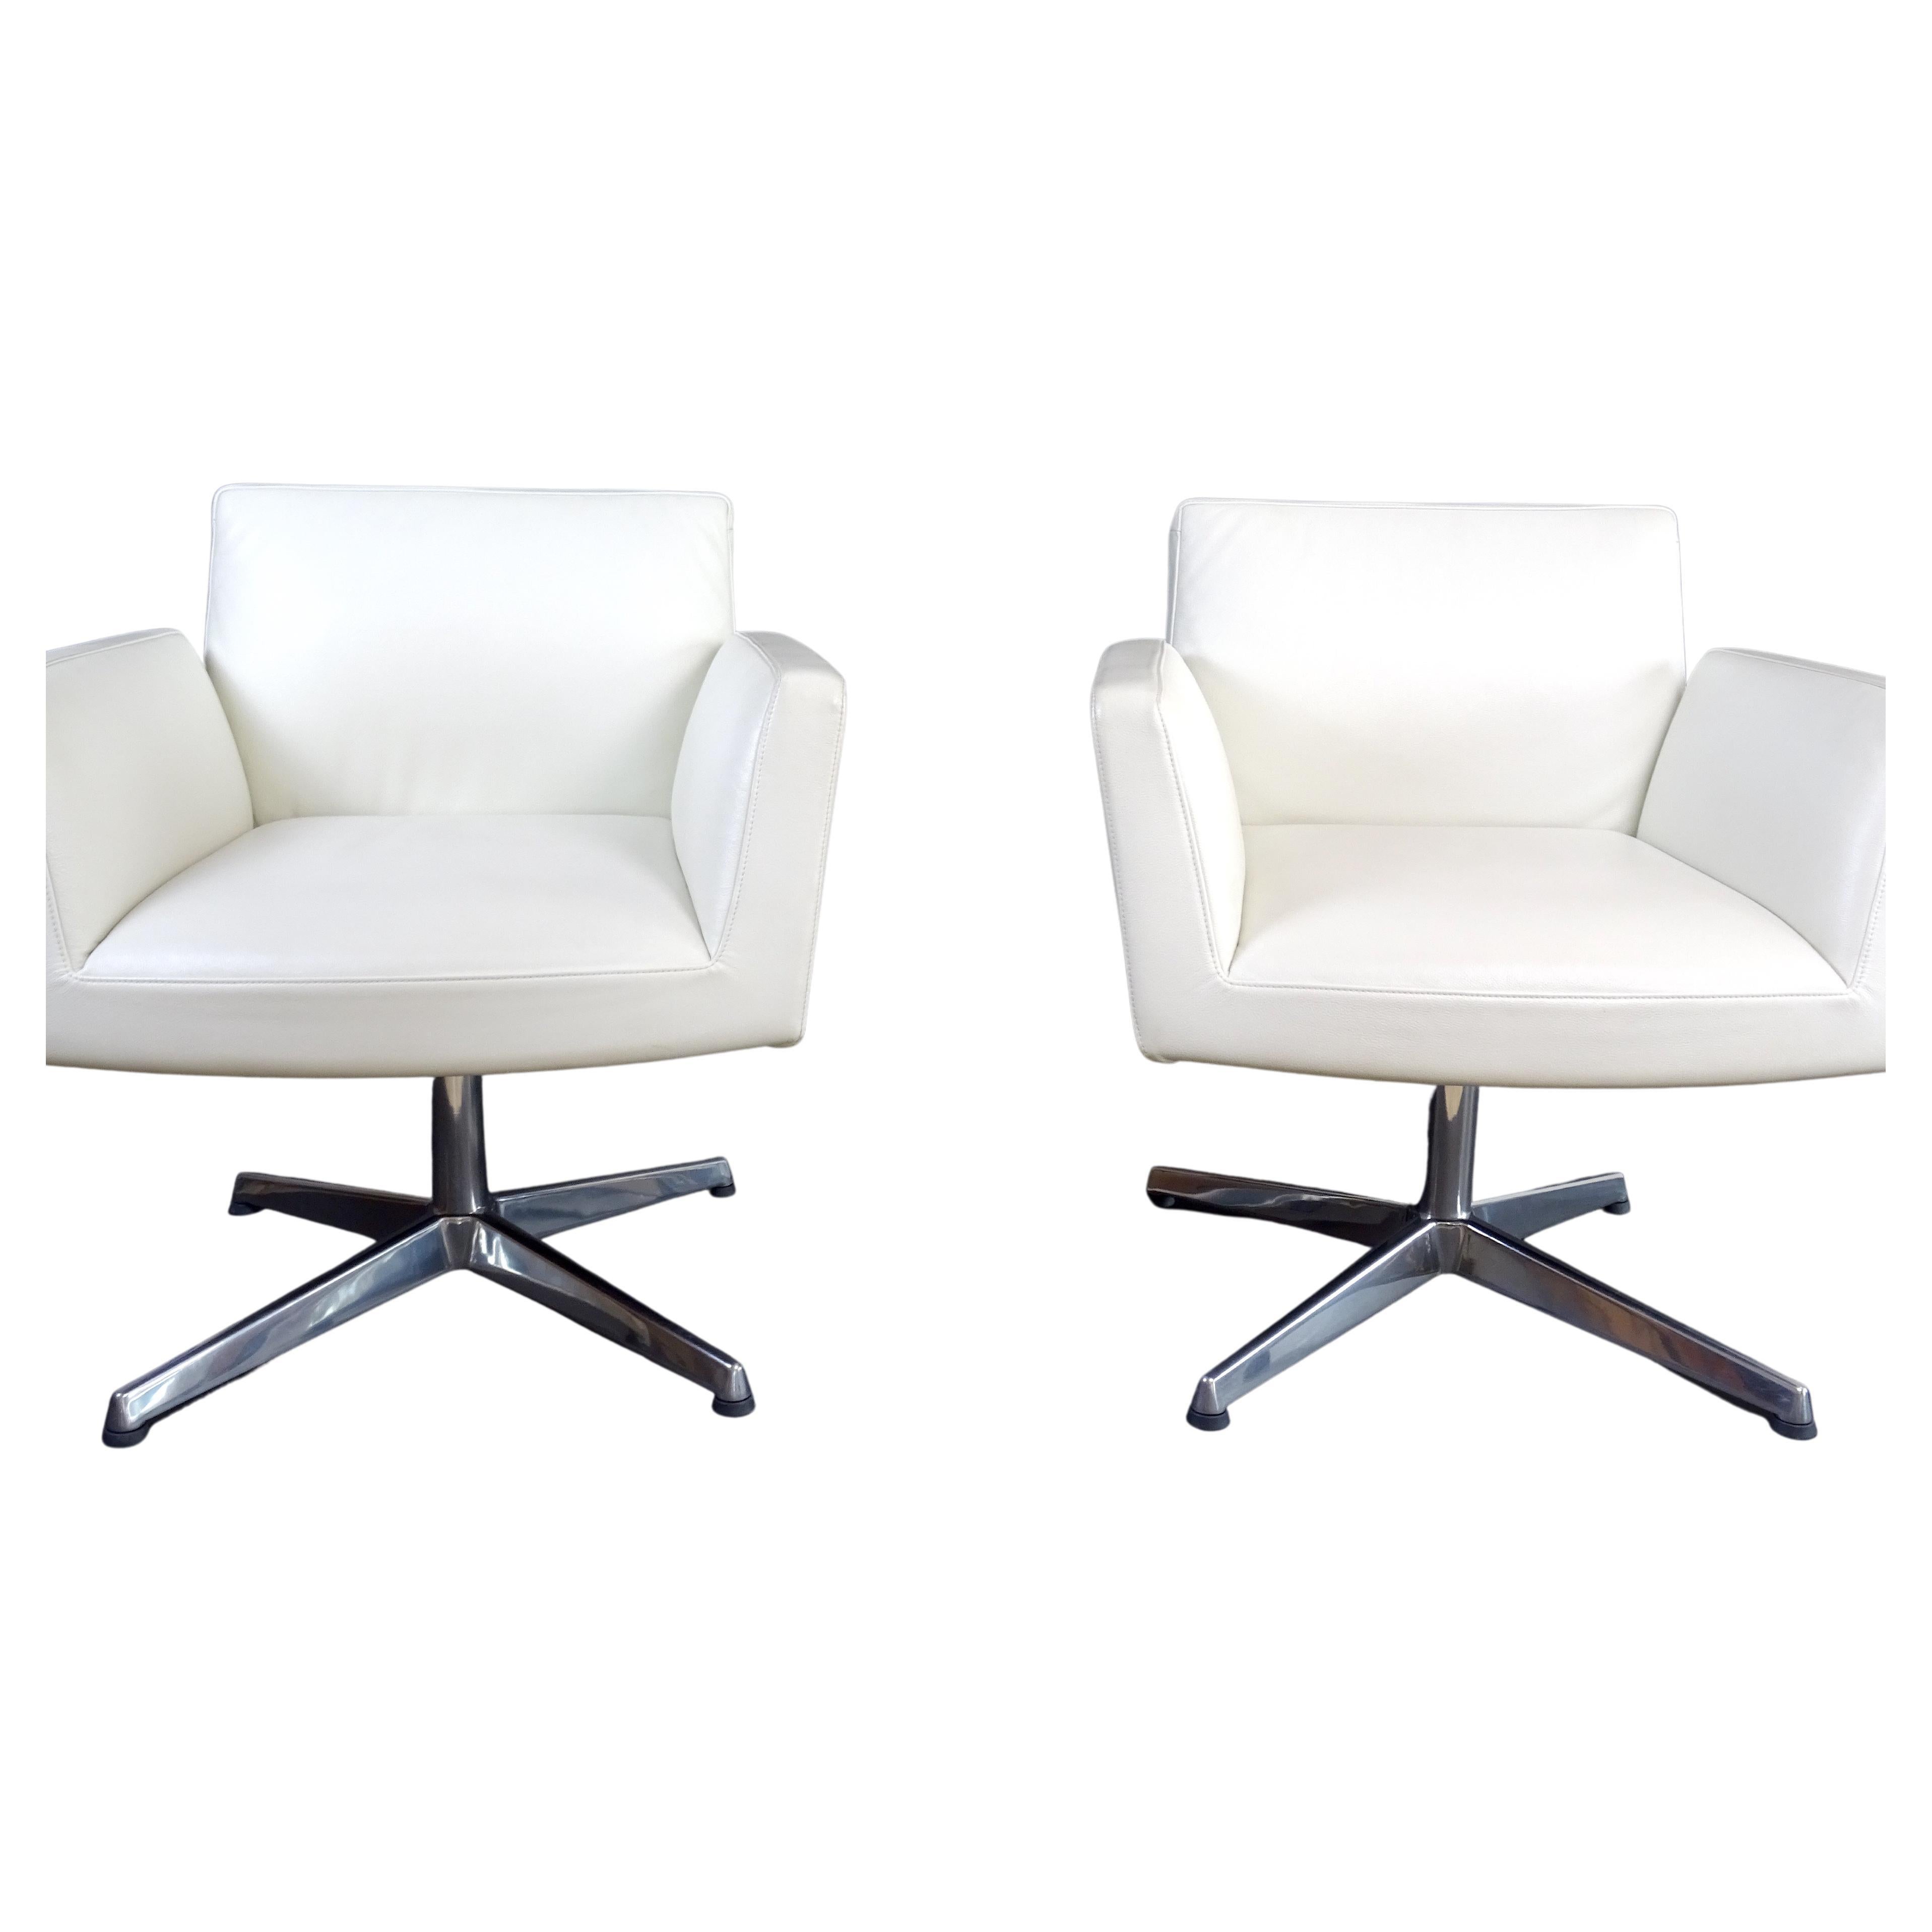 "Chancellor Visitor" Swivel Chairs by Livore, Altherr & Modina for Poltrona Frau